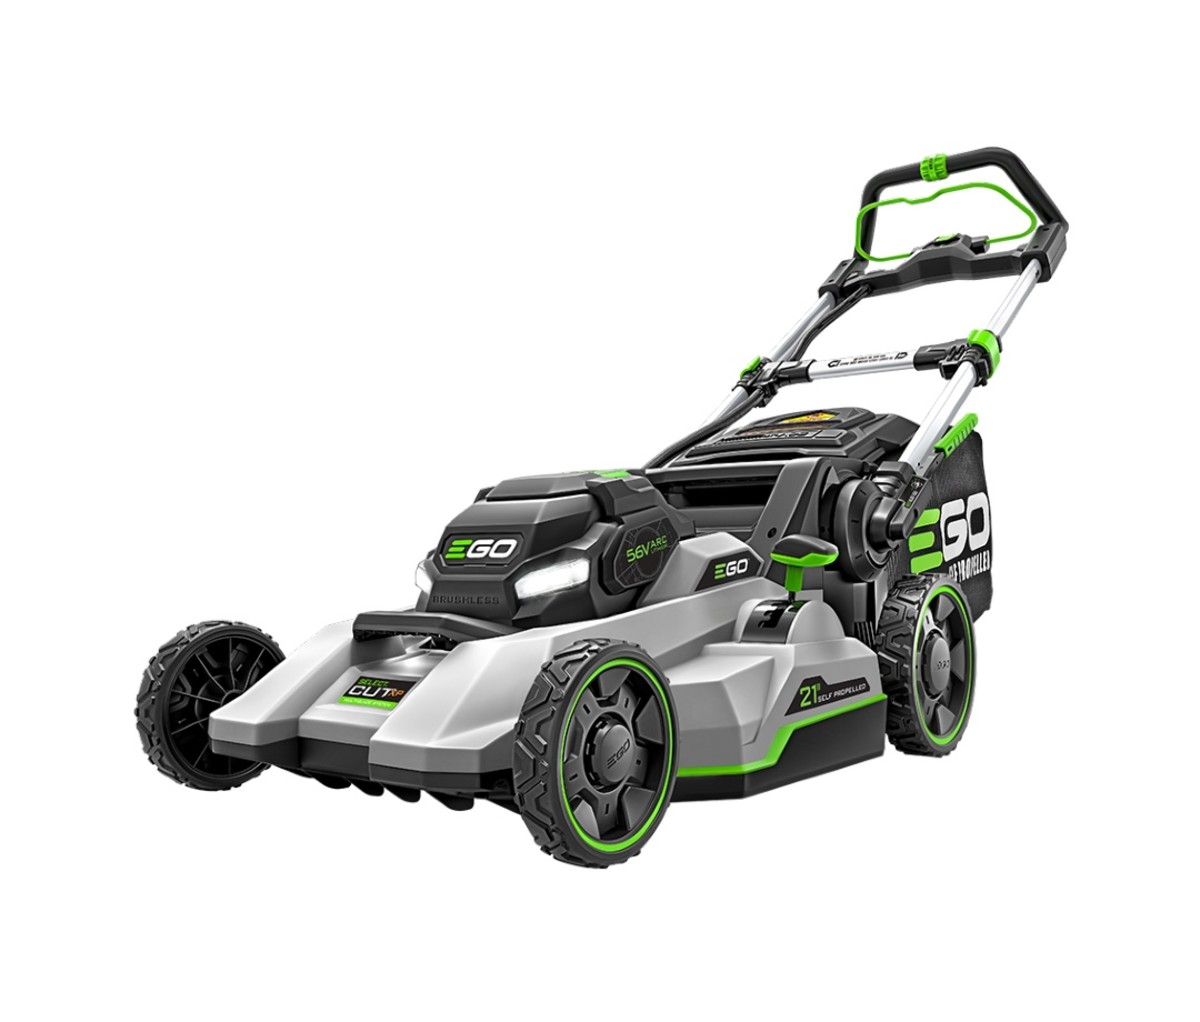 The Best Electric Lawn Mower, Chainsaw, and Yard Tools for Greener Pastures  - Men's Journal